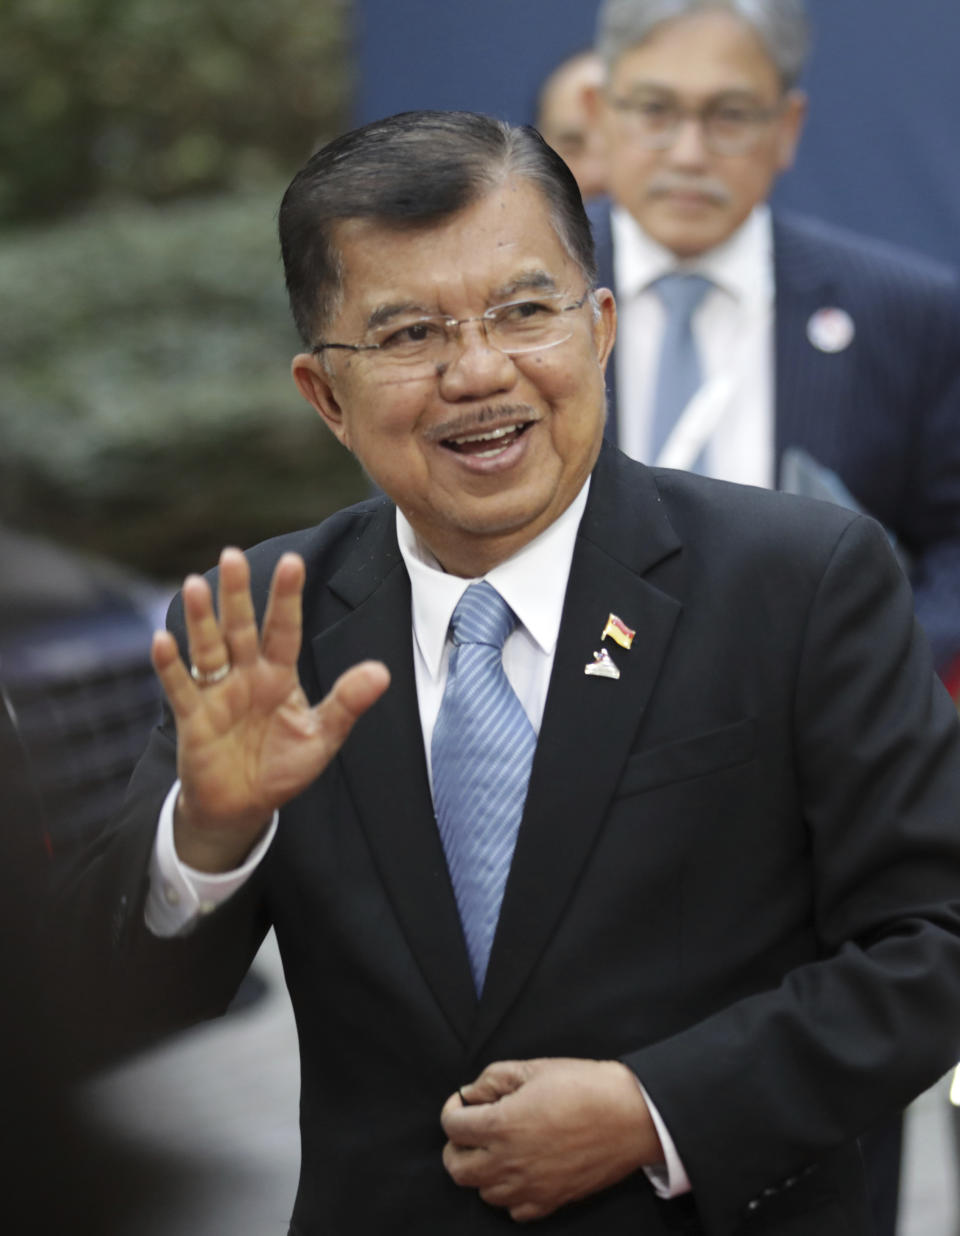 Indonesia's Vice-President Jusuf Kalla arrives for an EU-ASEM summit in Brussels, Friday, Oct. 19, 2018. EU leaders meet with their Asian counterparts Friday to discuss trade, among other issues. (AP Photo/Olivier Matthys)